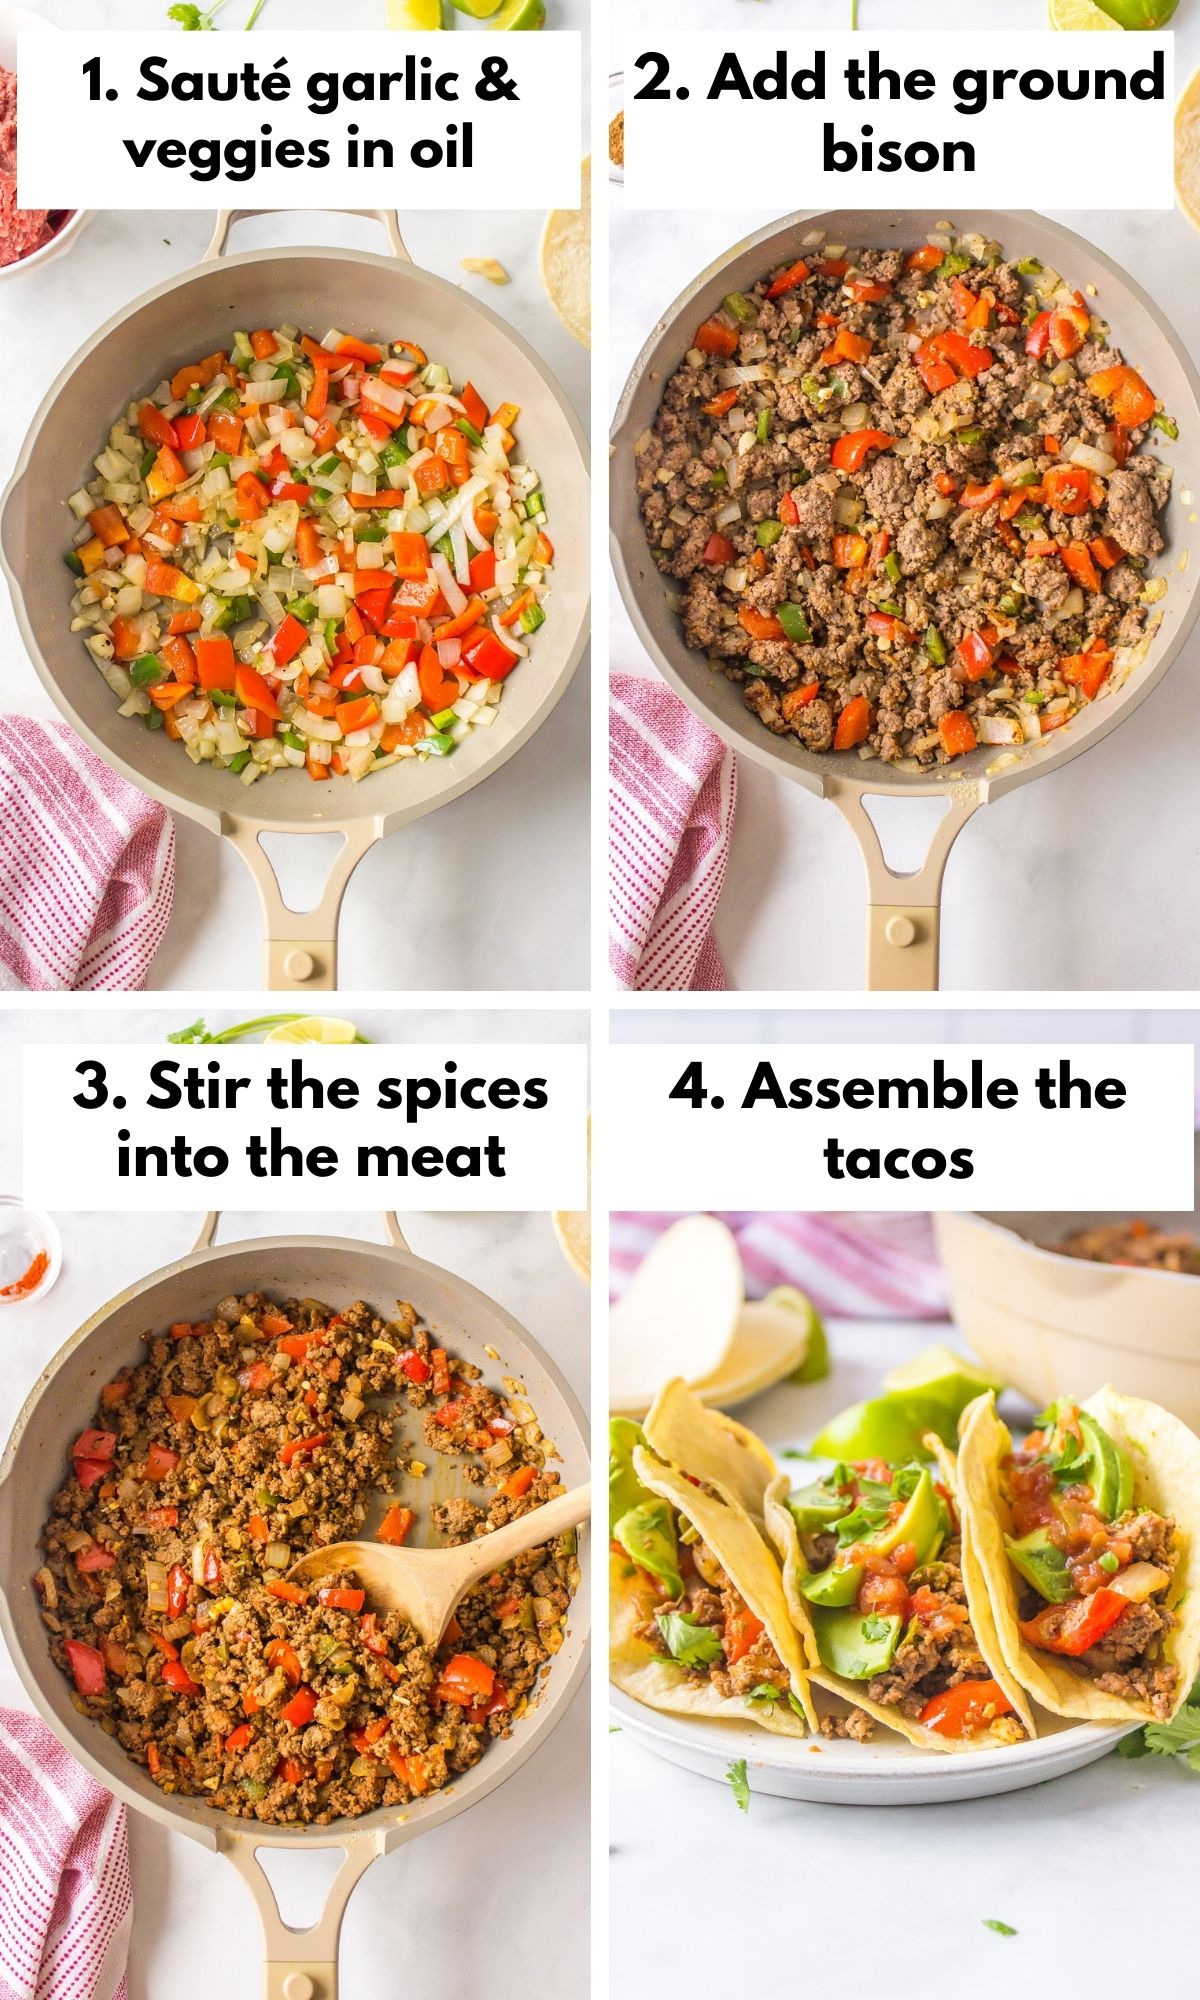 the process for making ground bison tacos.